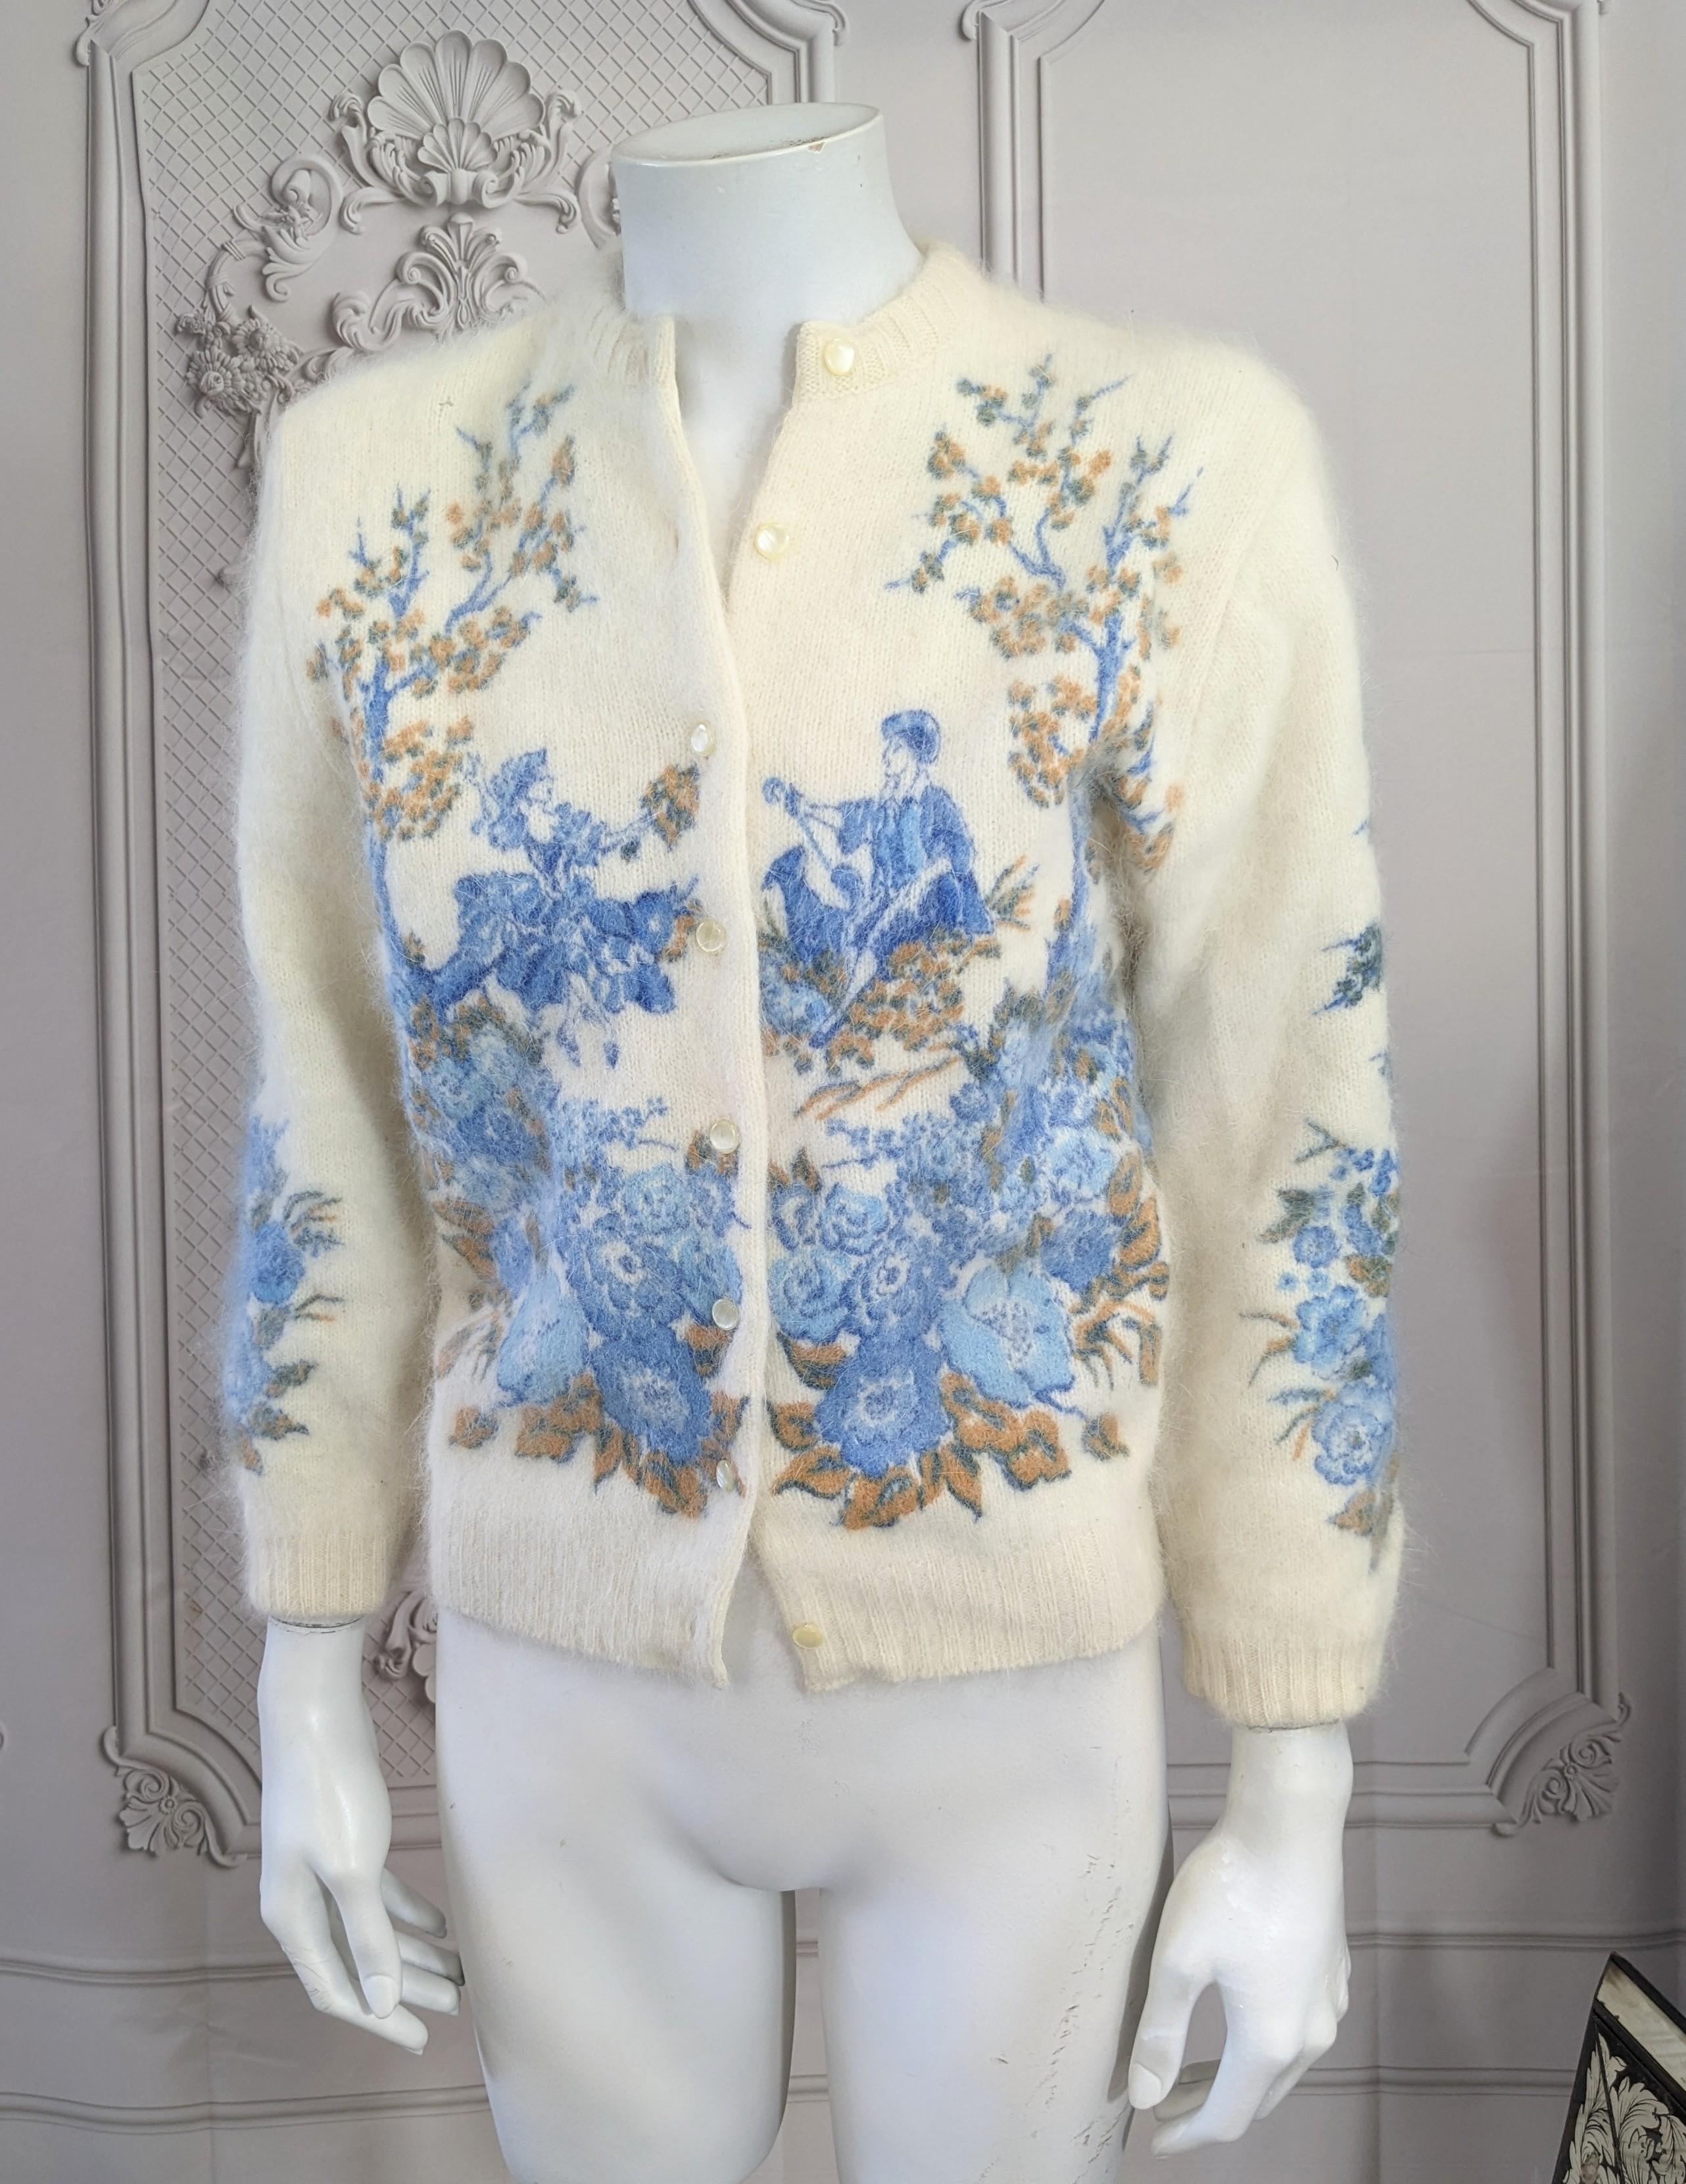 Charming 1950's Printed Angora Cardigan with 18th Century Courtesan scenes. Lambswool and angora rabbit blend with faux mother of pearl buttons. Size Small. 1950's USA. 